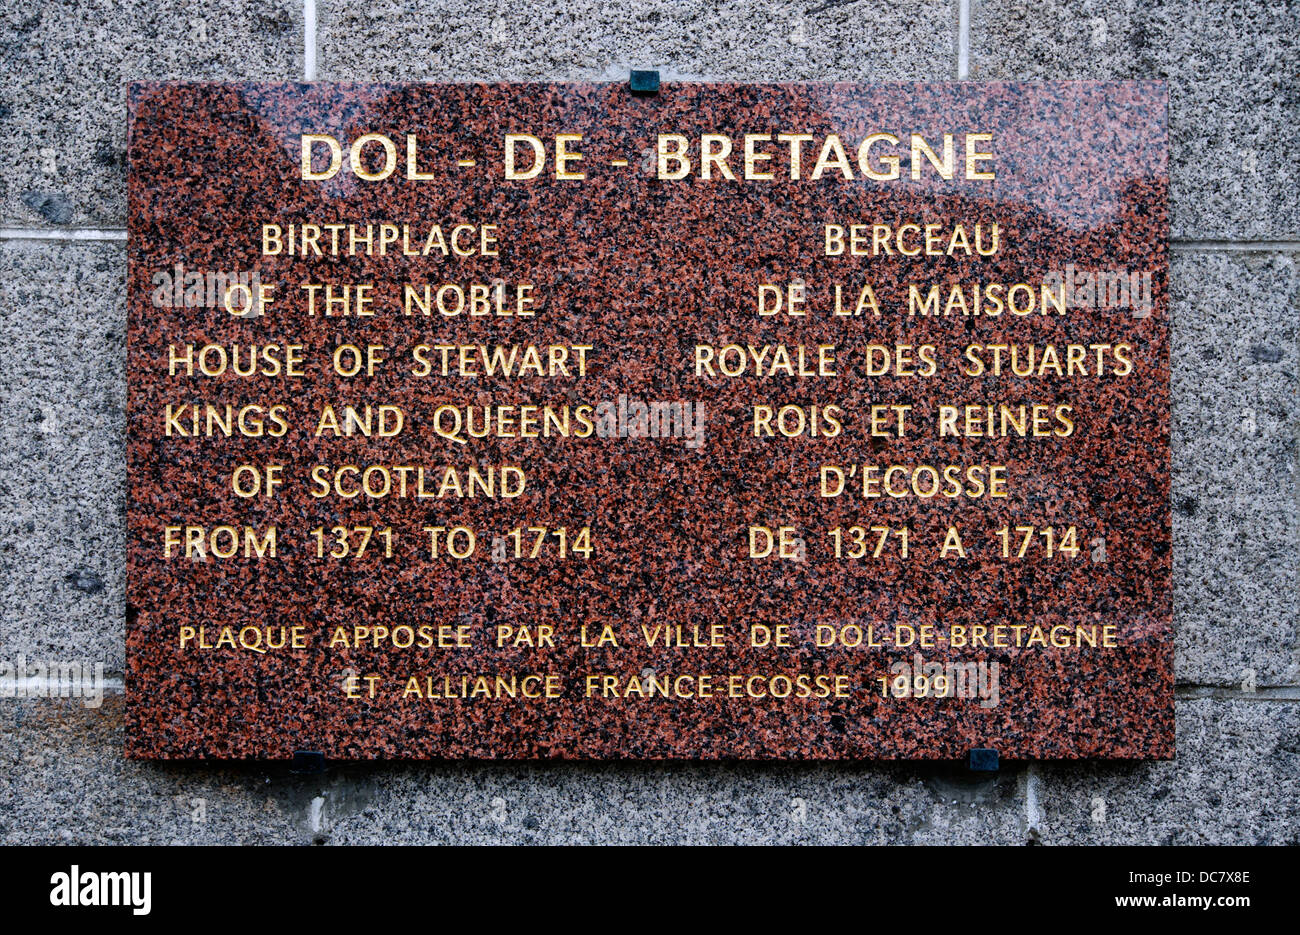 Dol-de-Bretagne, Brittany, France Plaque - Birthplace of the House of  Stewart, Kings and Queens of Scotland Stock Photo - Alamy